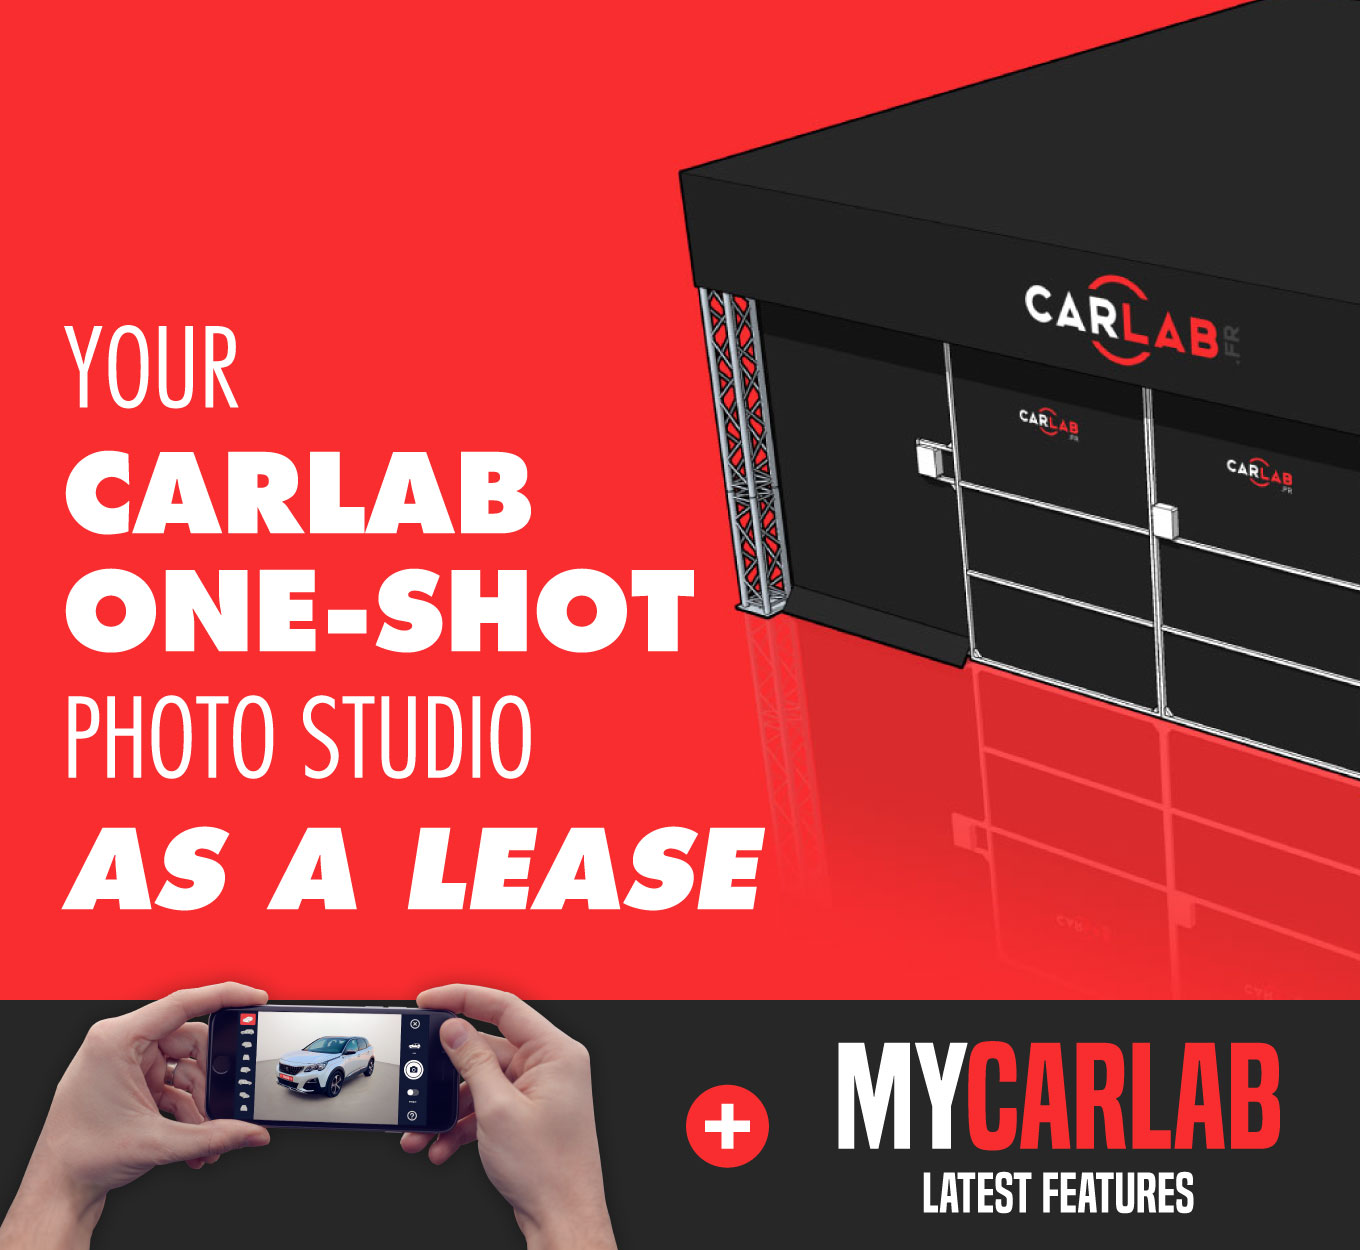 img banner carlab one-shot studio photo voiture leasing et nouveautés mycarlab video one-to-one